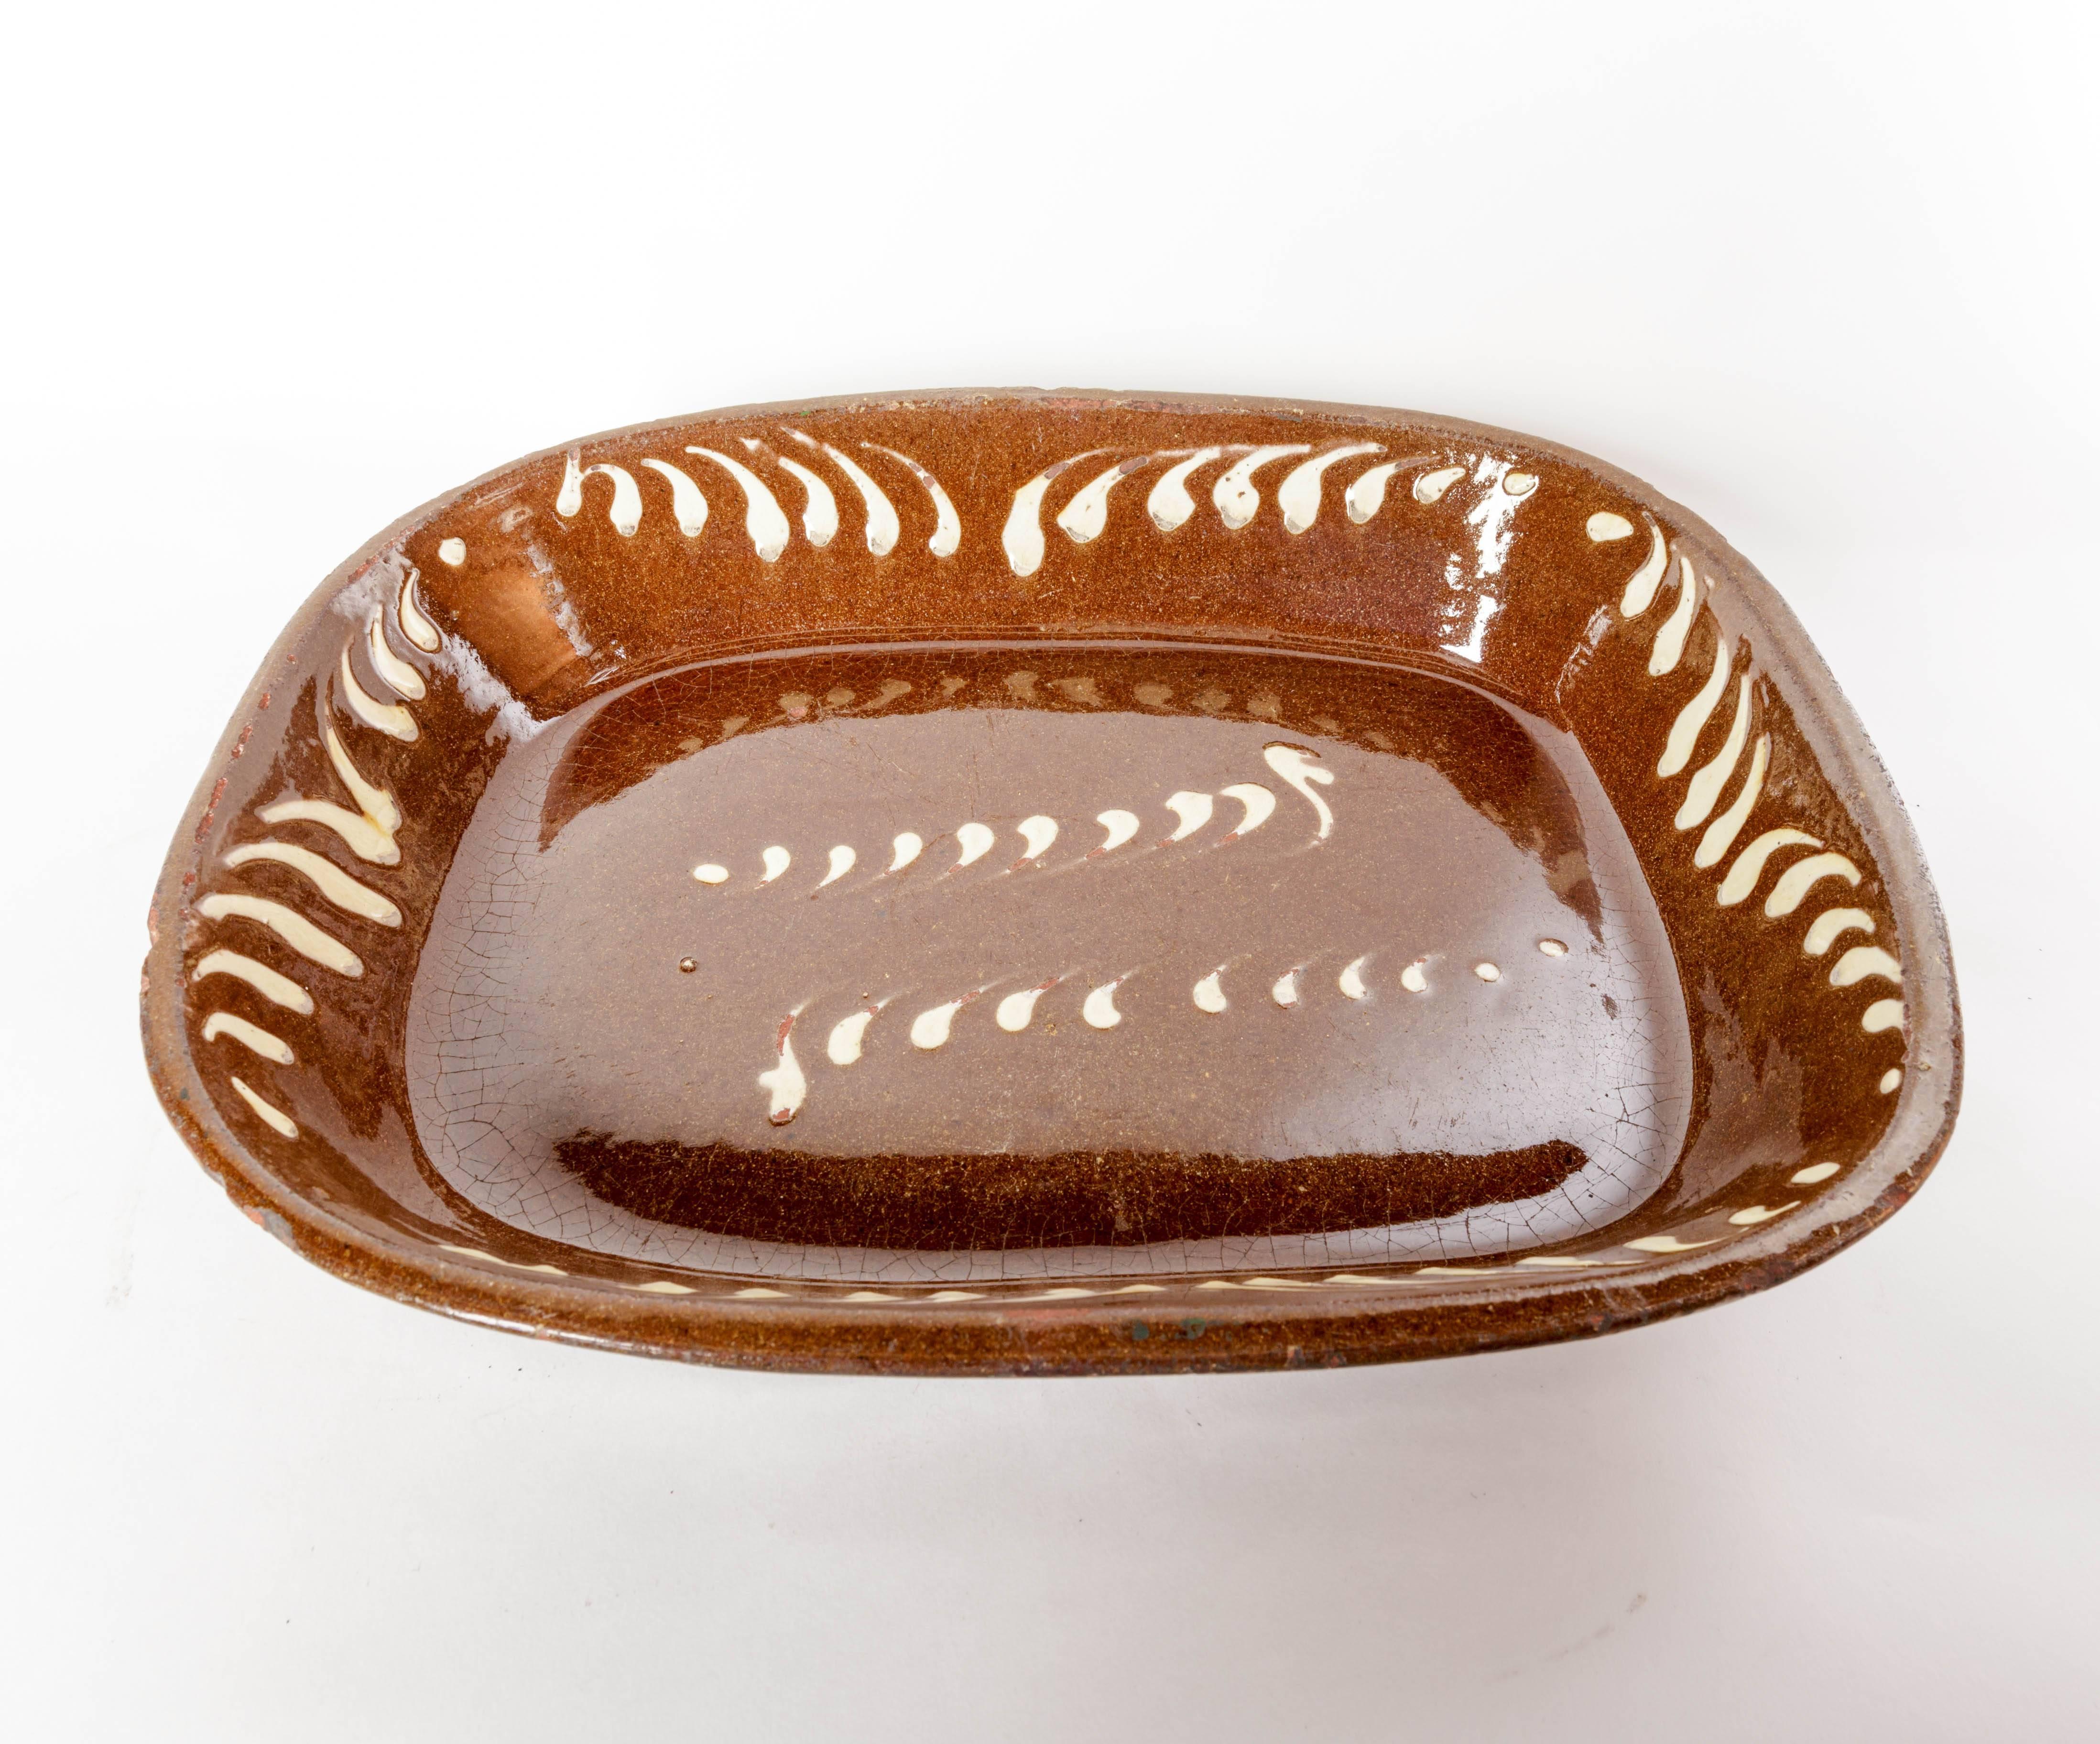 Large 19th century English slipware baking dish with off-white decoration. The tapered sides meet to form a rounded rectangular base. The gloss brown glaze extends down two thirds of the exterior side. The off-white squiggle decoration is on all